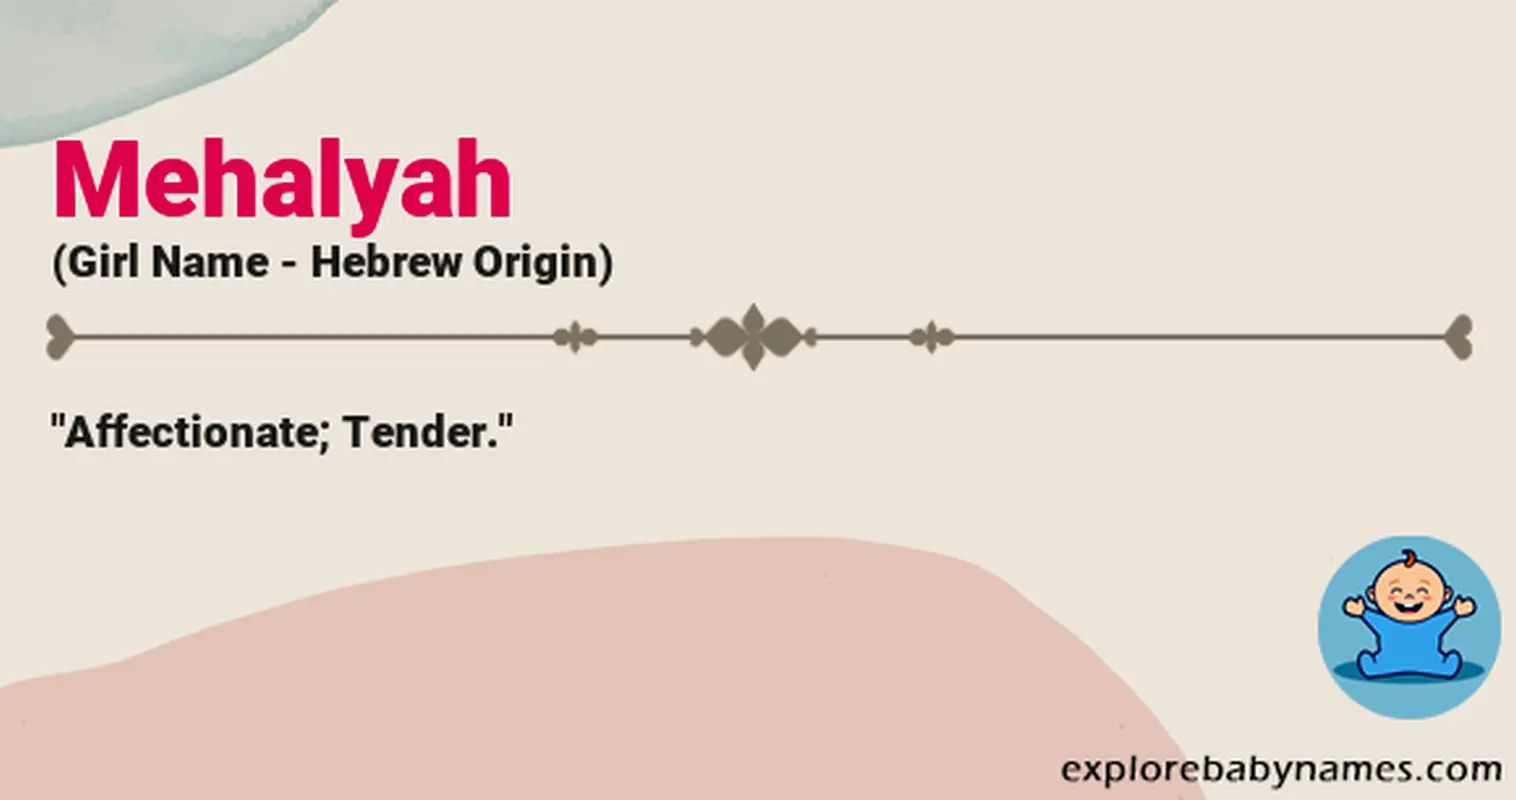 Meaning of Mehalyah